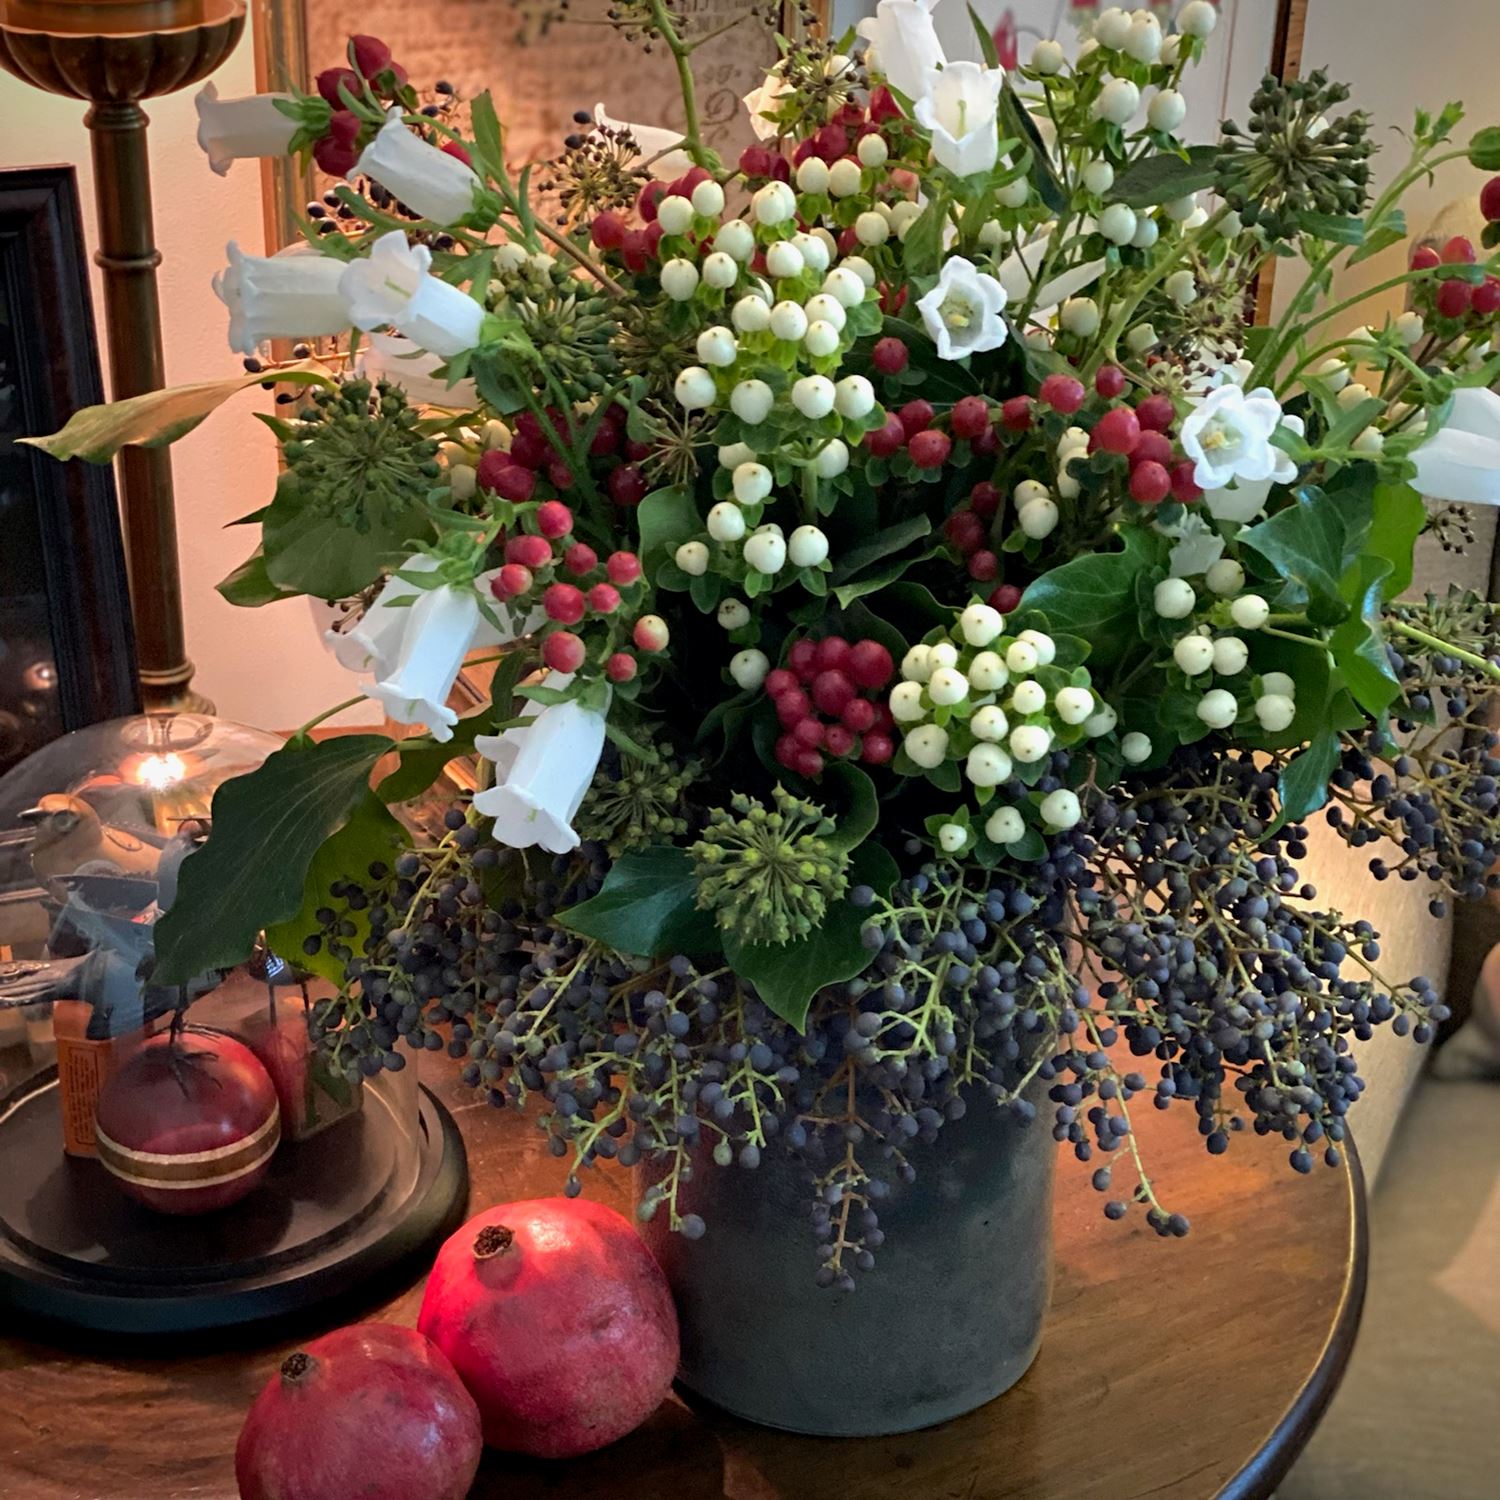 The Most Beautiful Dried Floral Arrangements For This Holiday Season